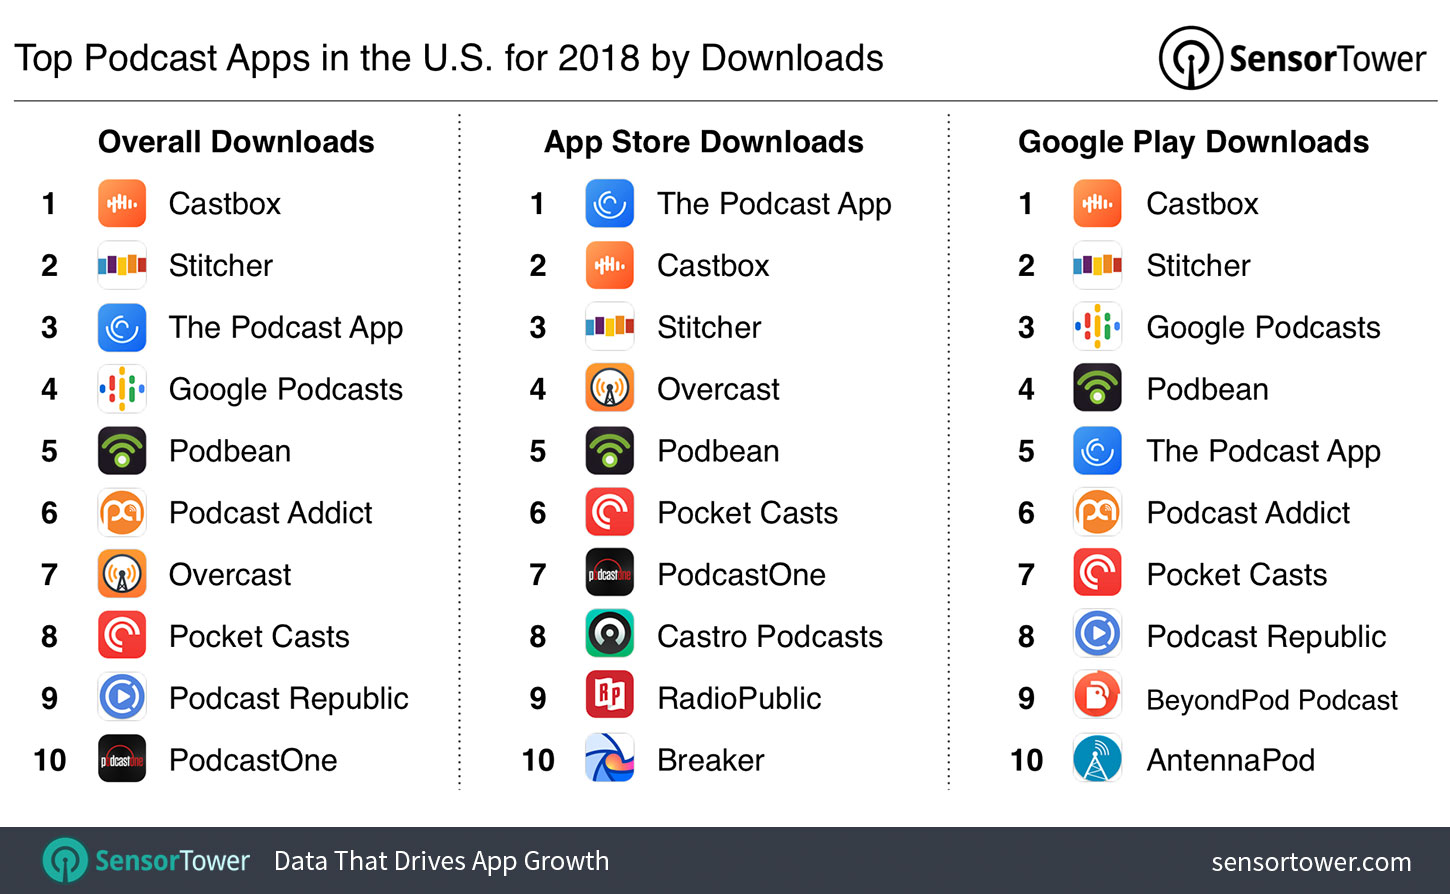 Top Podcast Apps in the U.S. for 2018